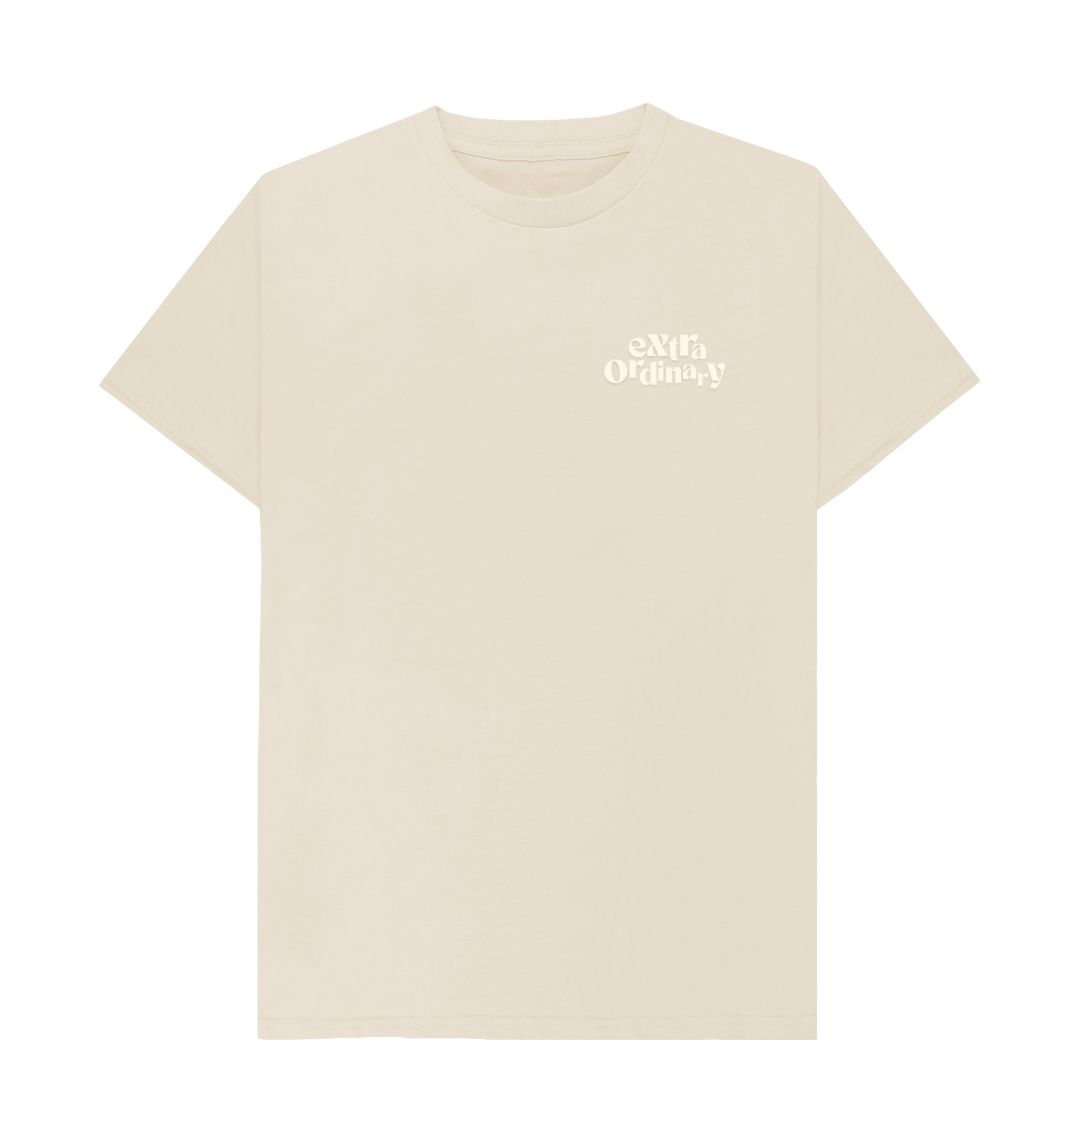 Oat EXTRA ORDINARY TITLE Tee